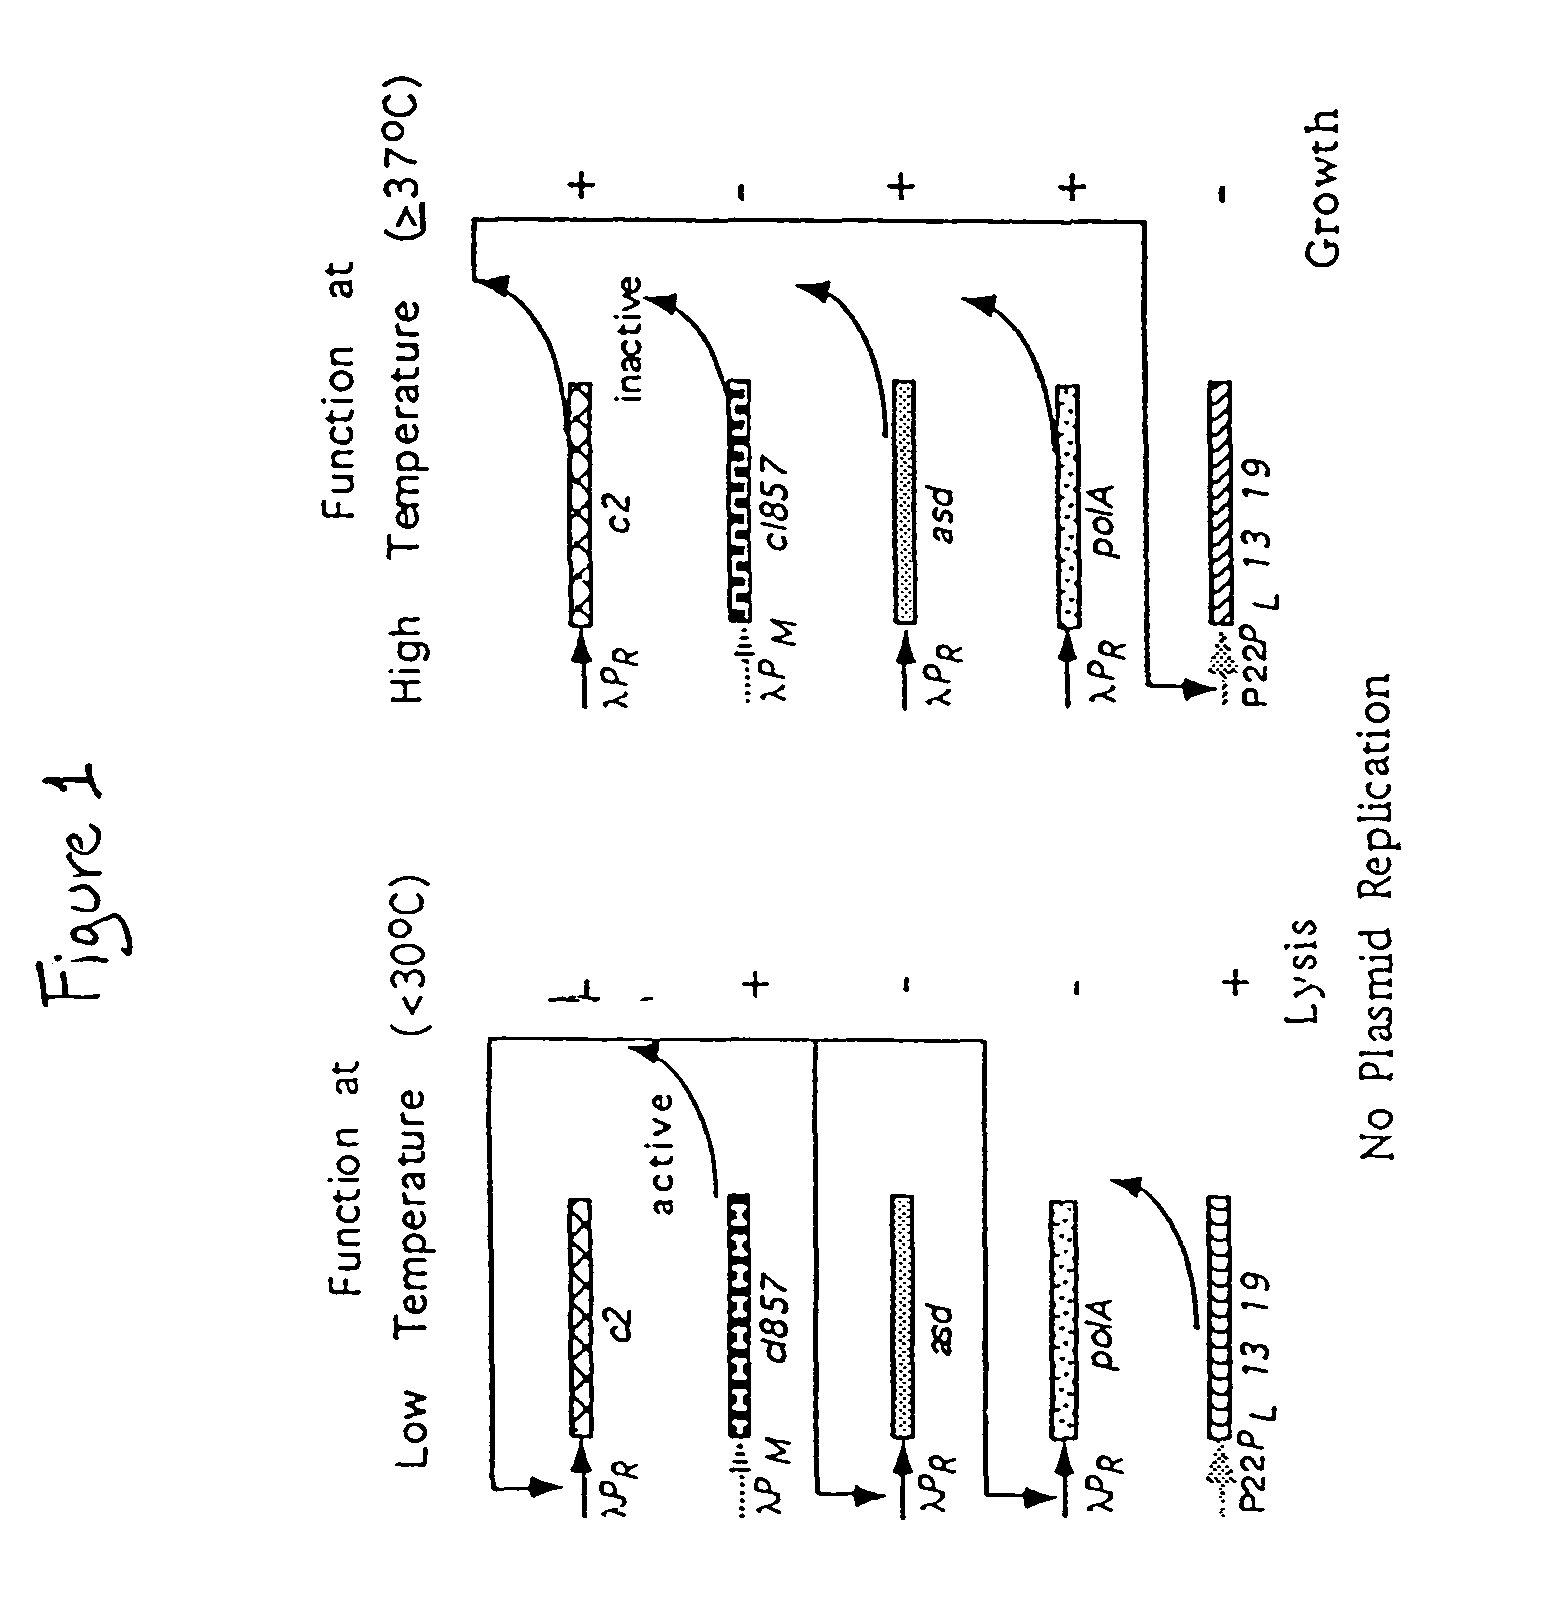 Recombinant bacterial vaccine system with environmentally limited viability